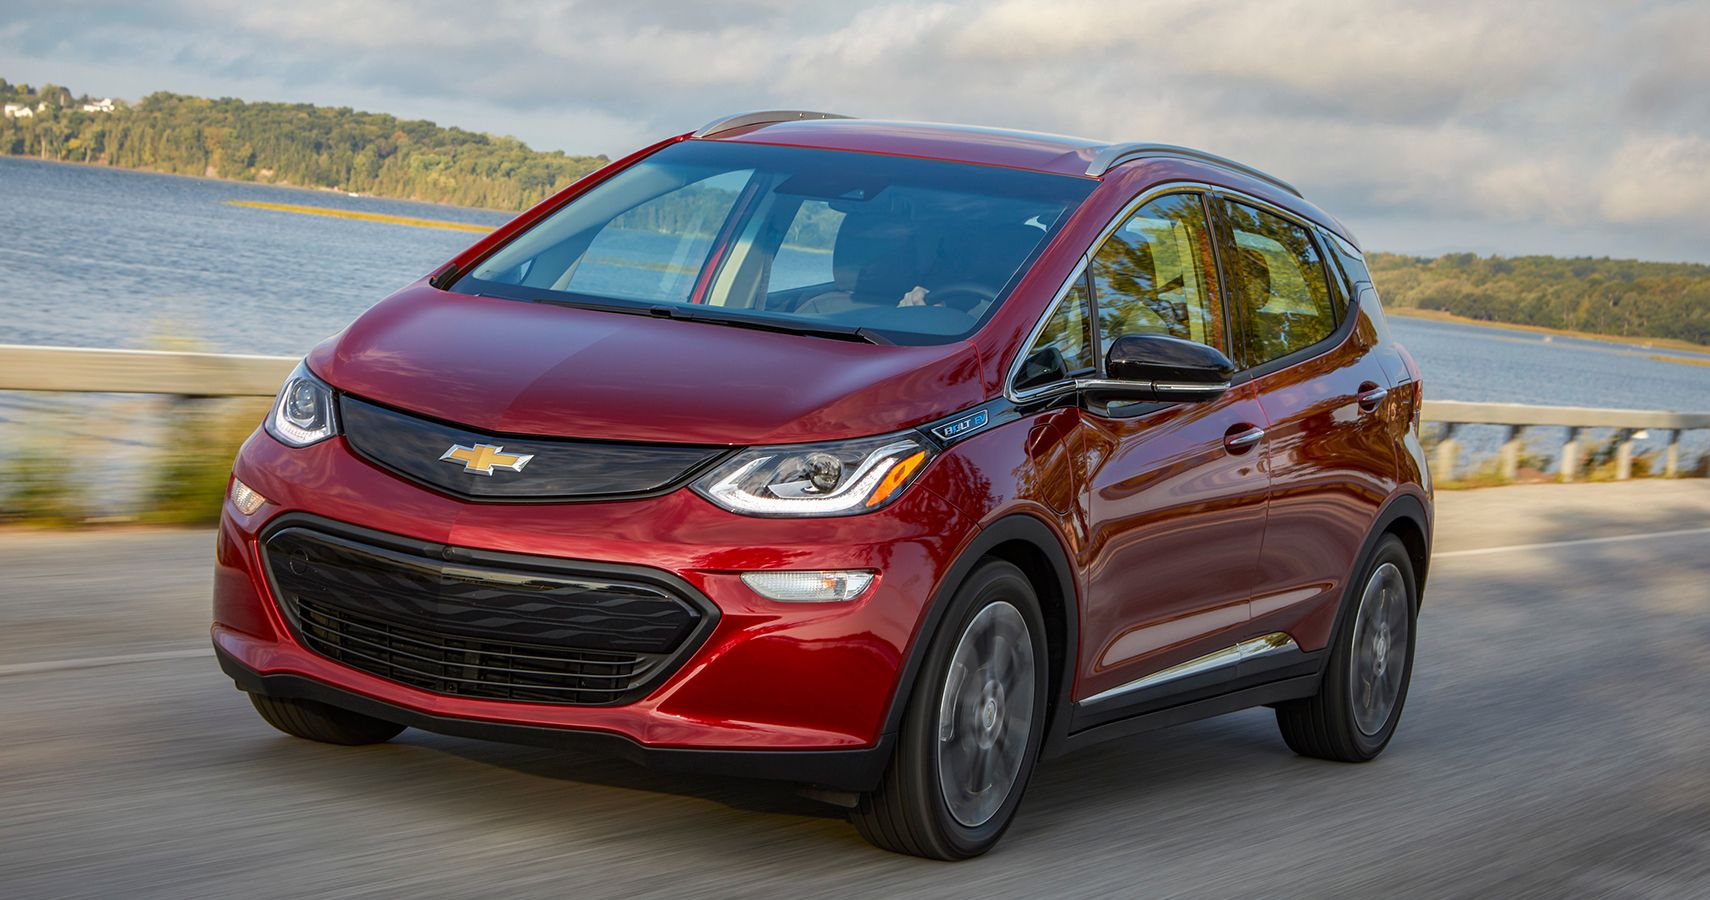 GM Offering 20 Percent Discount On New Chevrolet Bolt EVs For Uber Drivers